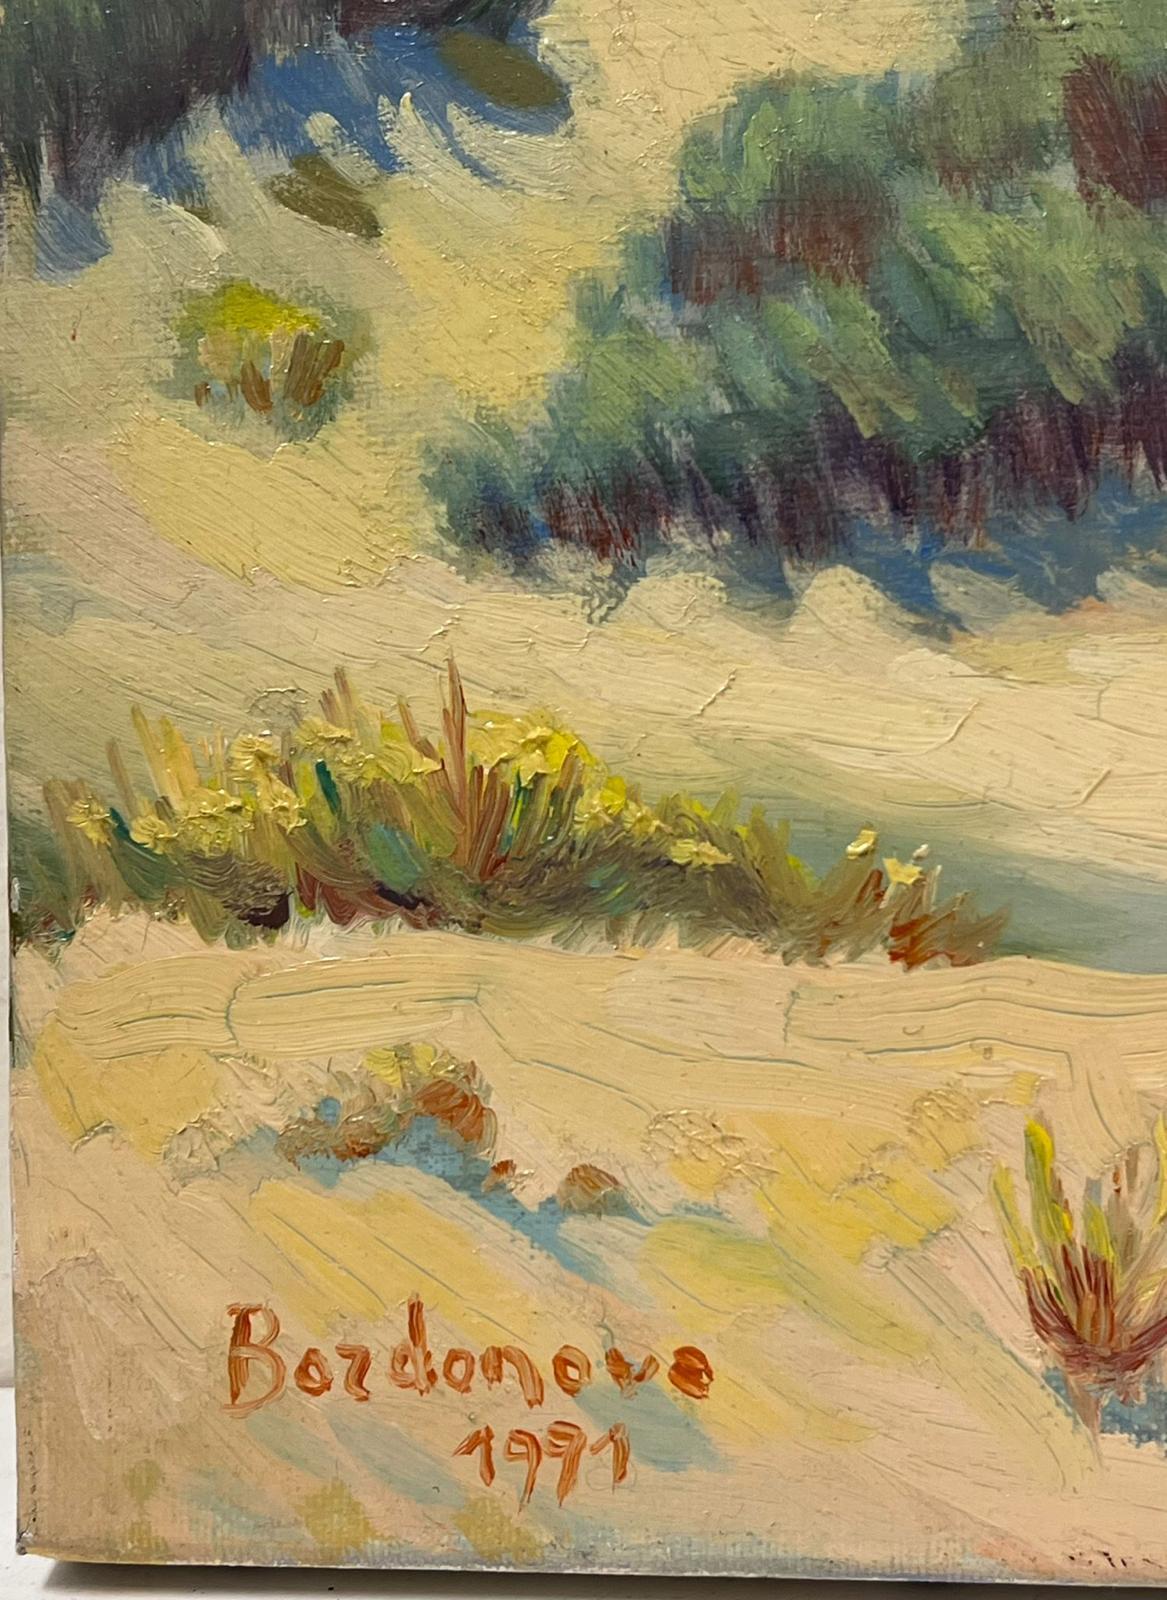 Sand Dunes
by Georges Bordonave (French contemporary)
signed oil painting on canvas, unframed
dated 1991
canvas: 13 x 16 inches
condition: very good
provenance: from a large private collection of this artists work, western Paris, France. 